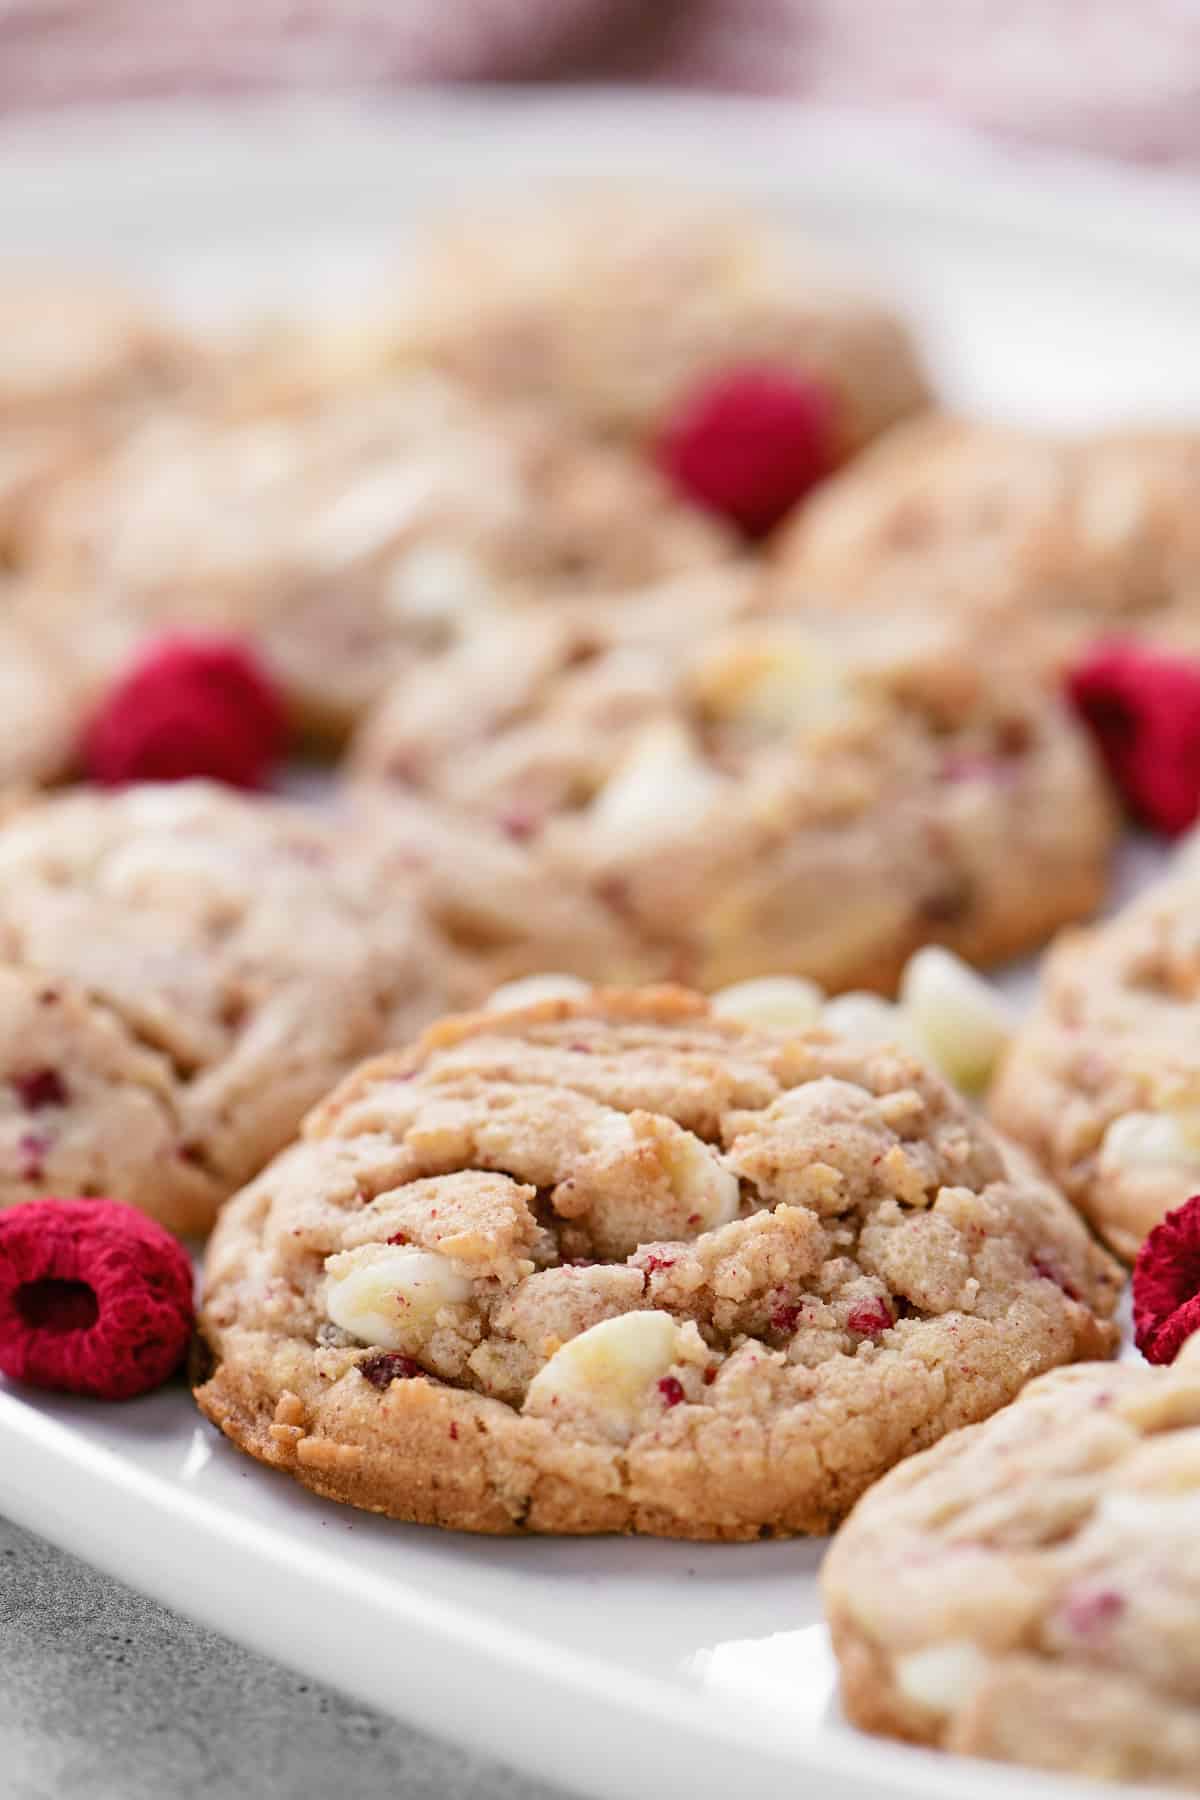 Raspberry cheesecake cookie with white chocolate chips.